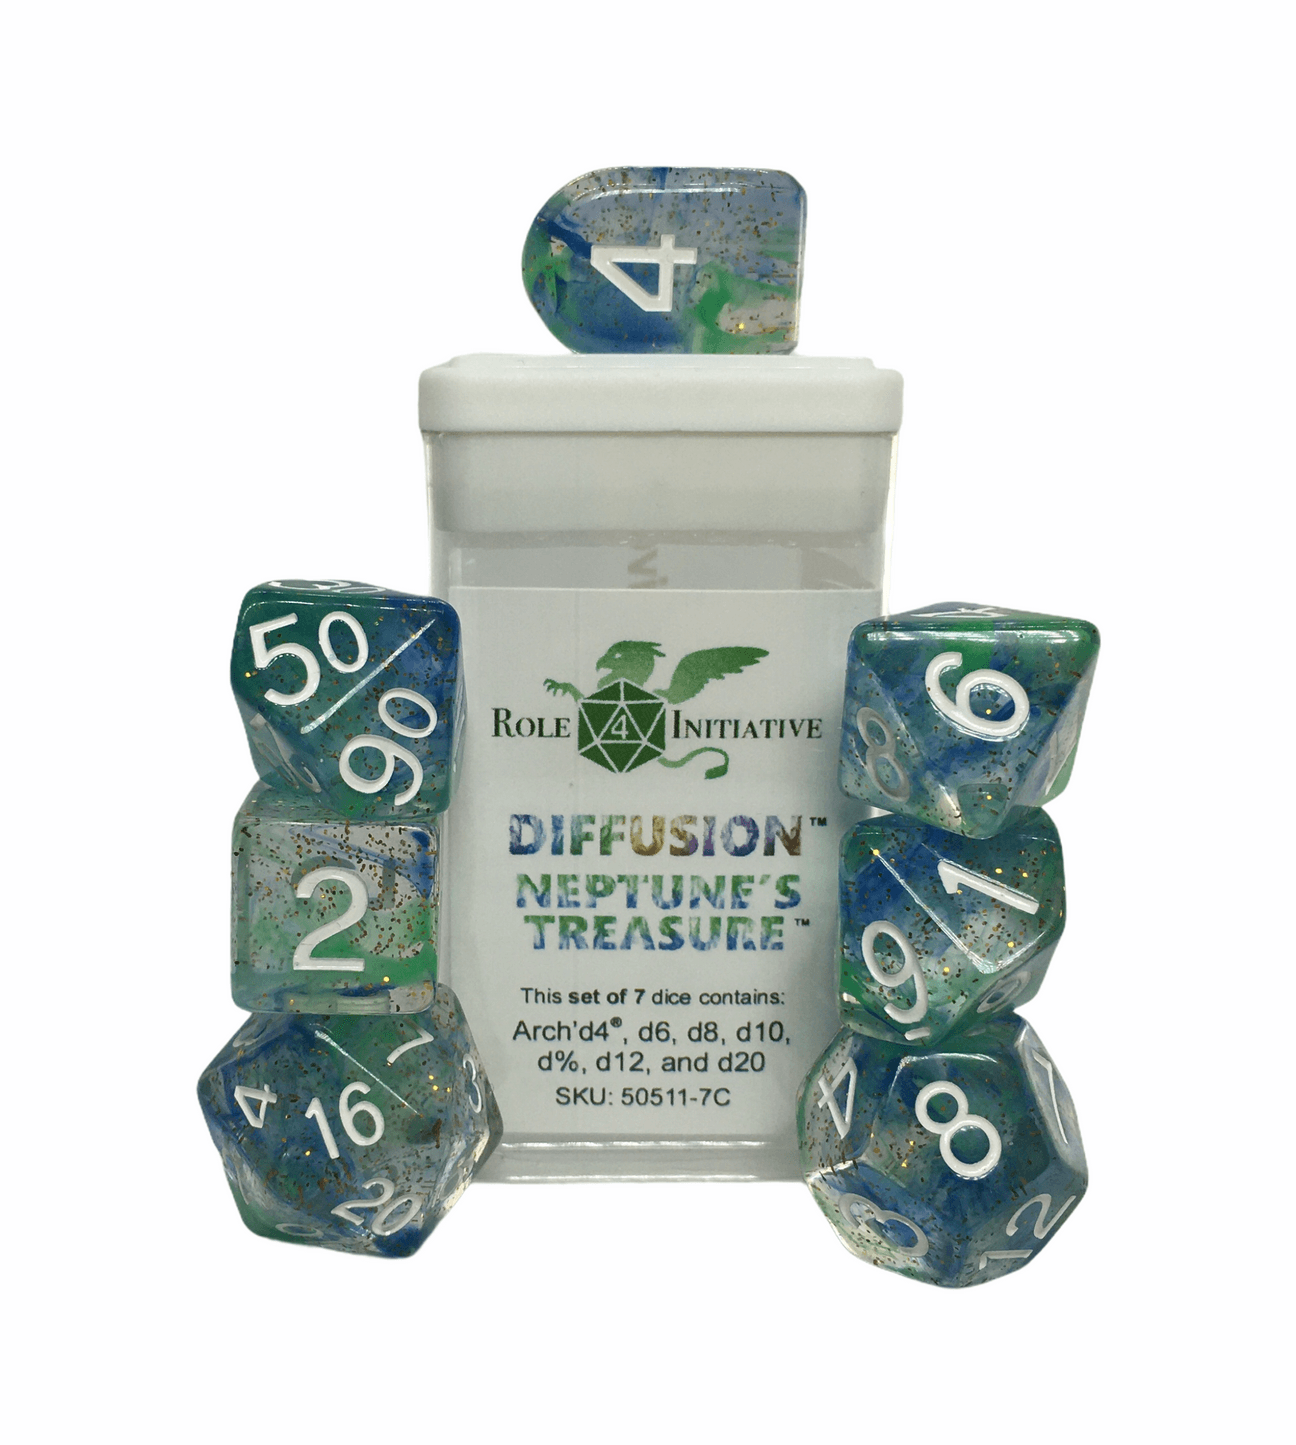 Neptune’s Treasure Diffusion Dice - 7 dice set (with Arch’d4™) - The Fourth Place